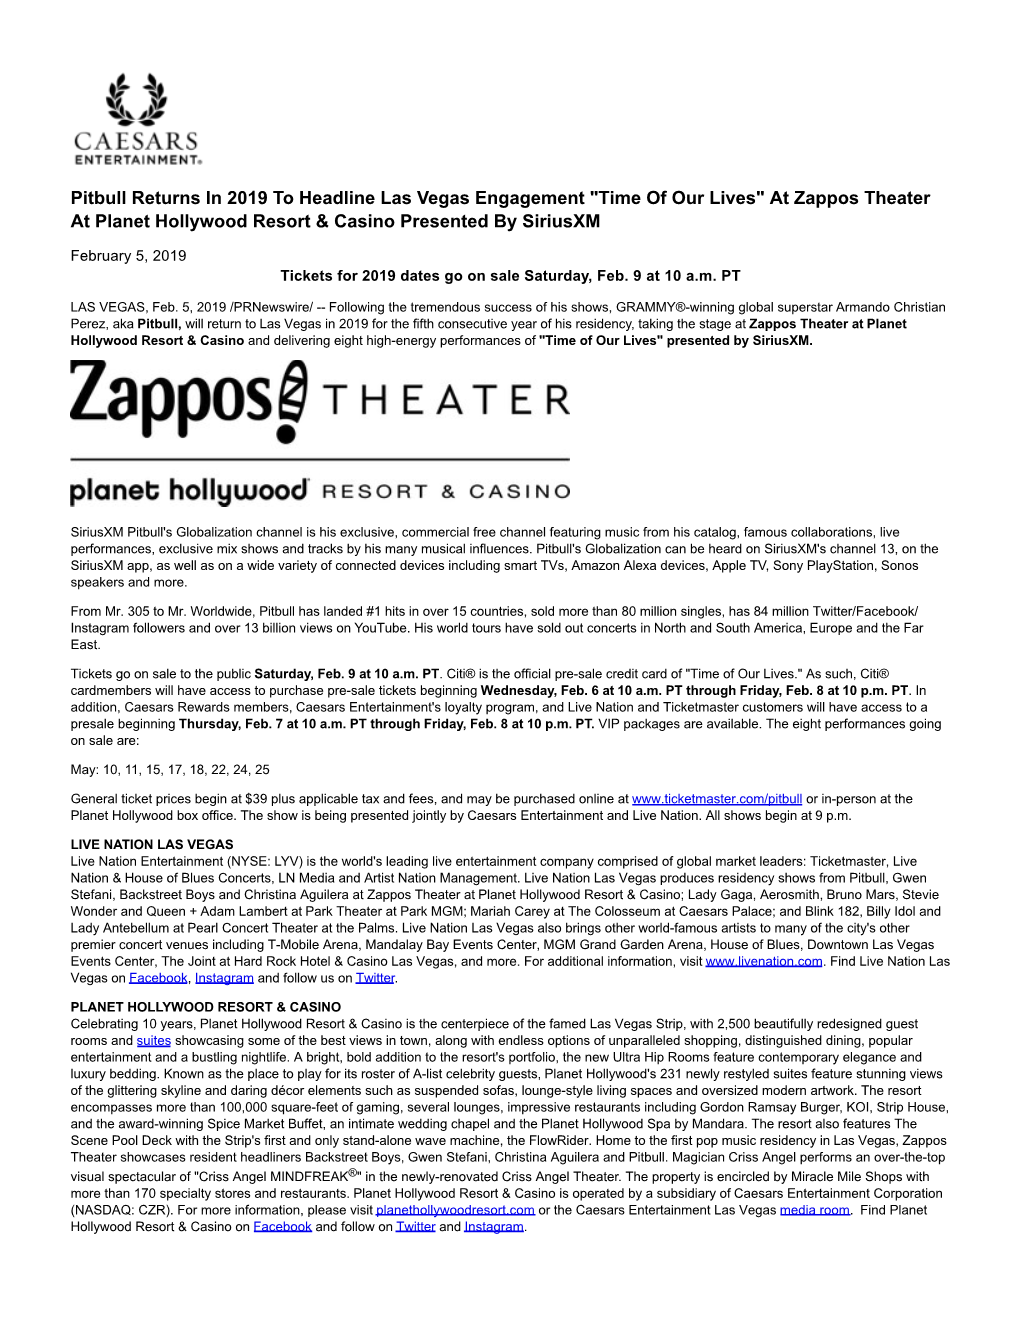 At Zappos Theater at Planet Hollywood Resort & Casino Presented by Siriusxm